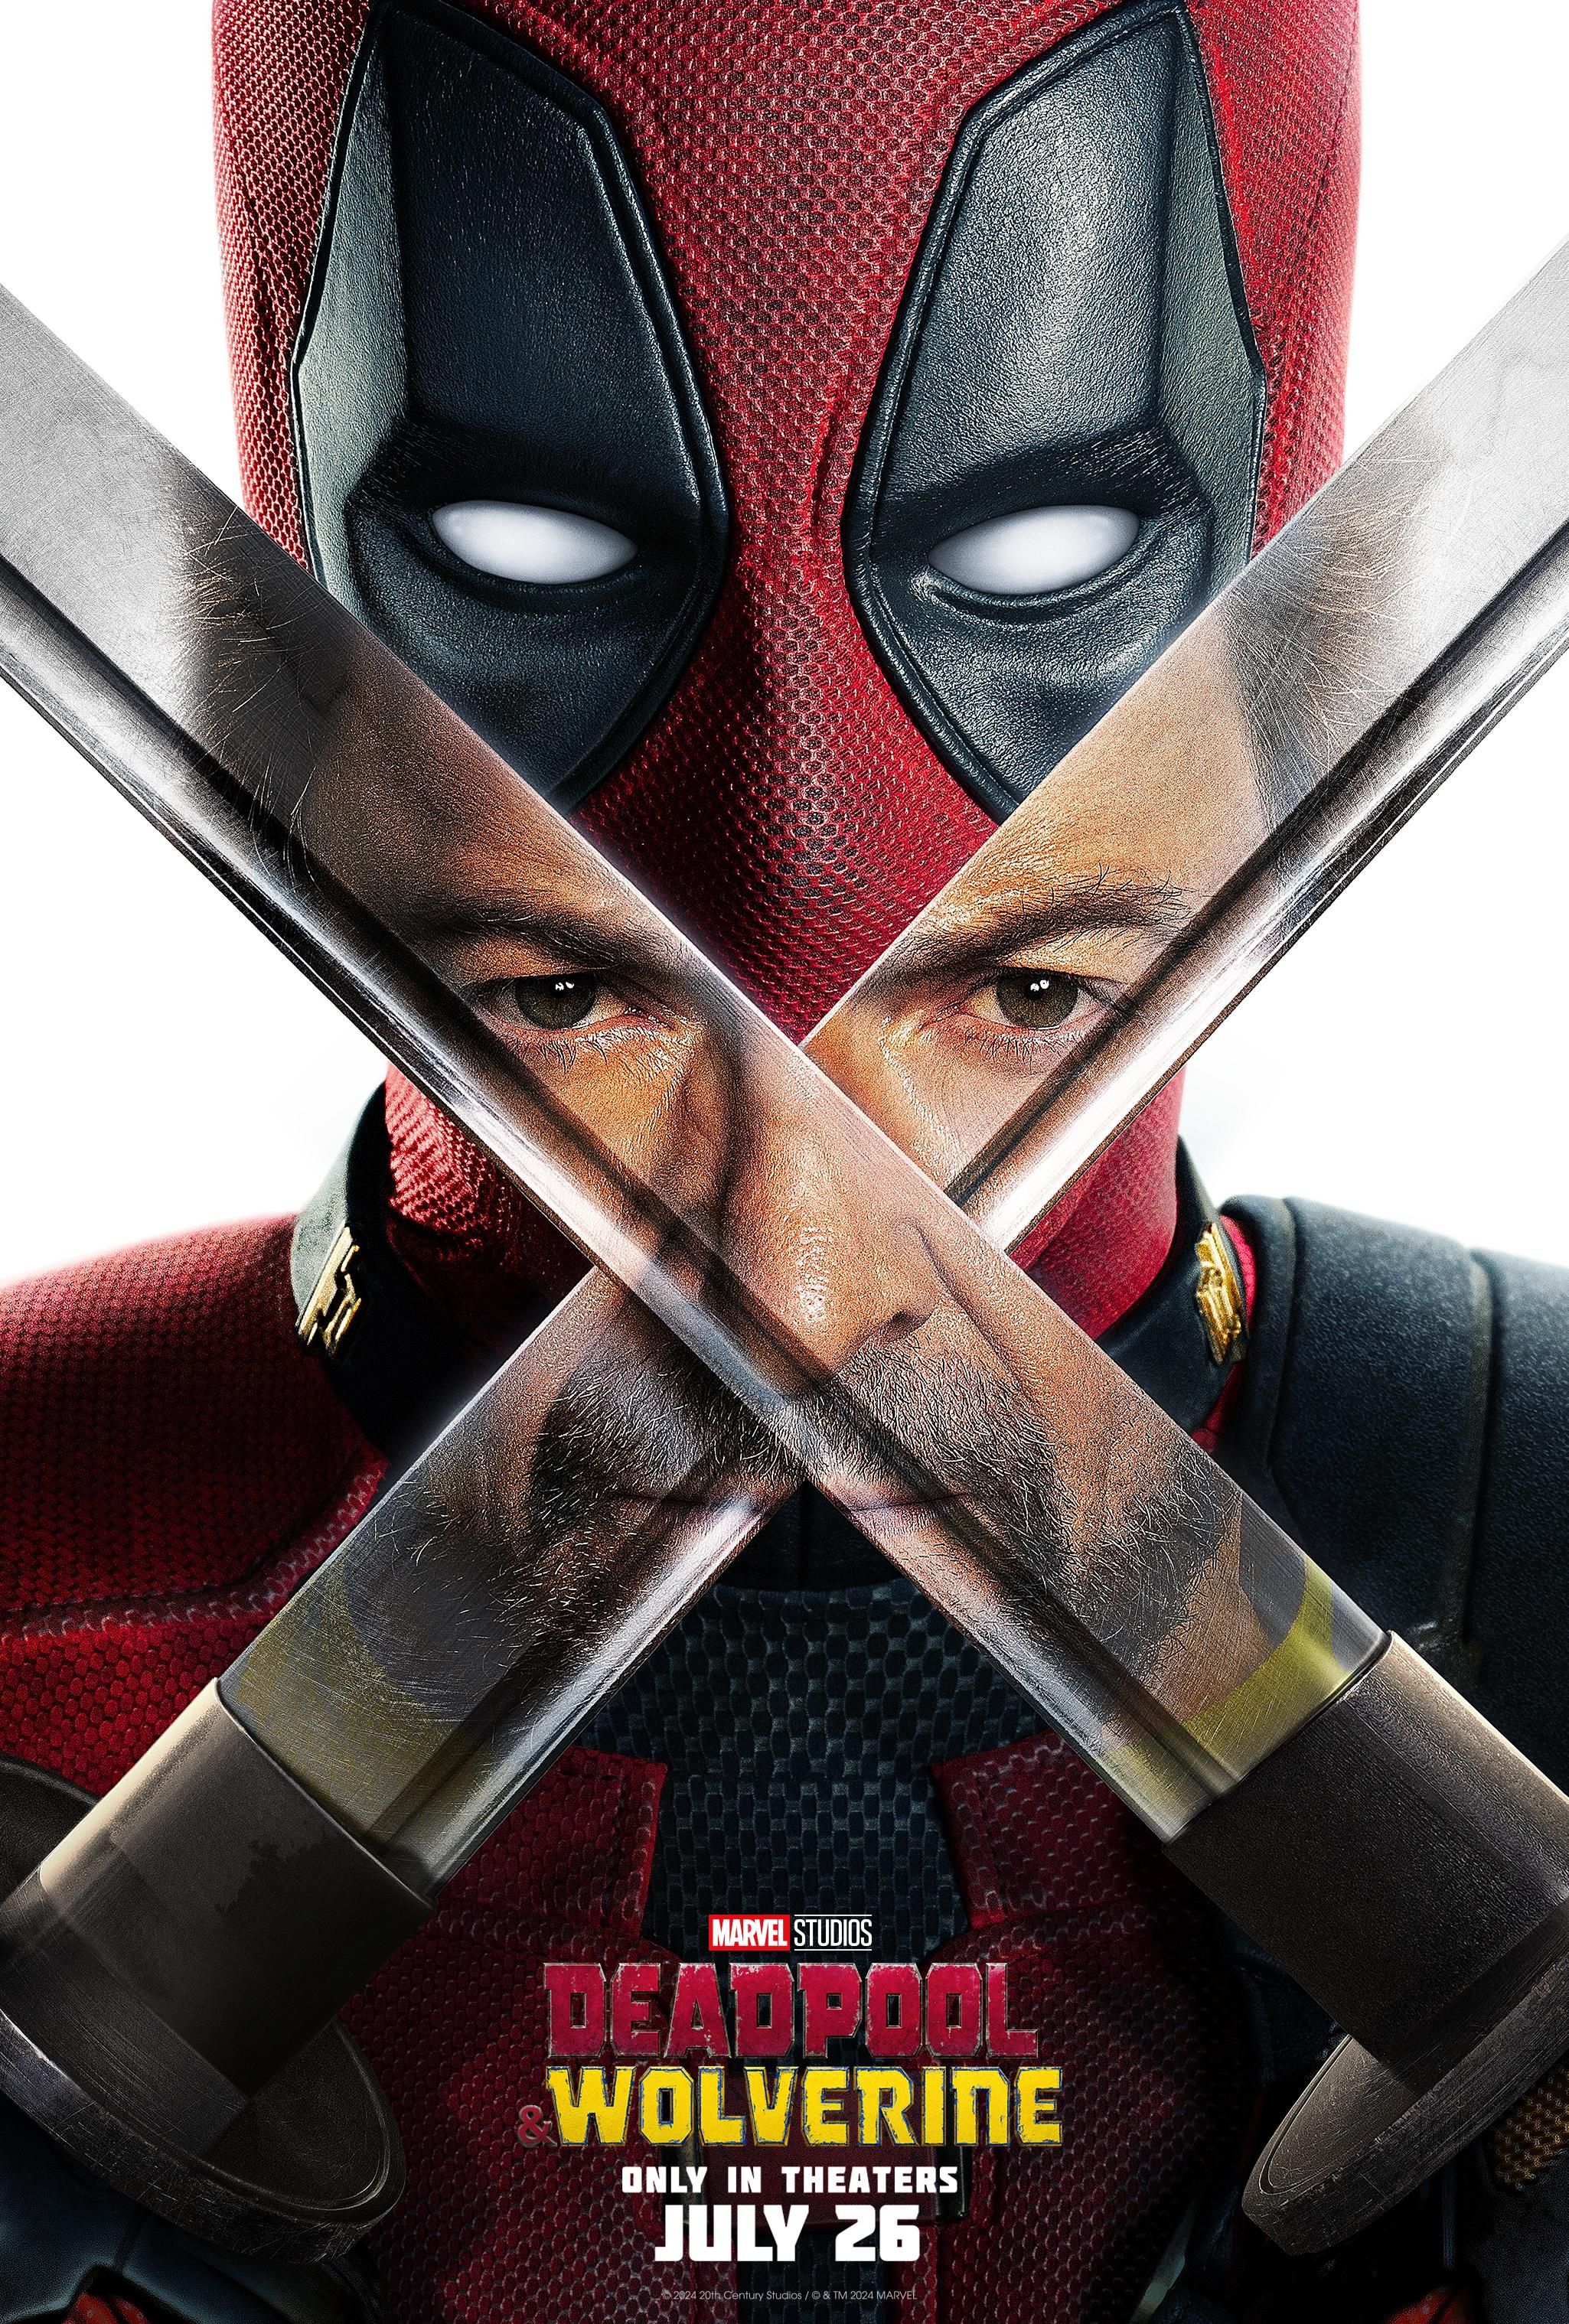 Deadpool and Wolverine Poster Showing Wade Wilson's Swords Showing Hugh Jackman's Reflection